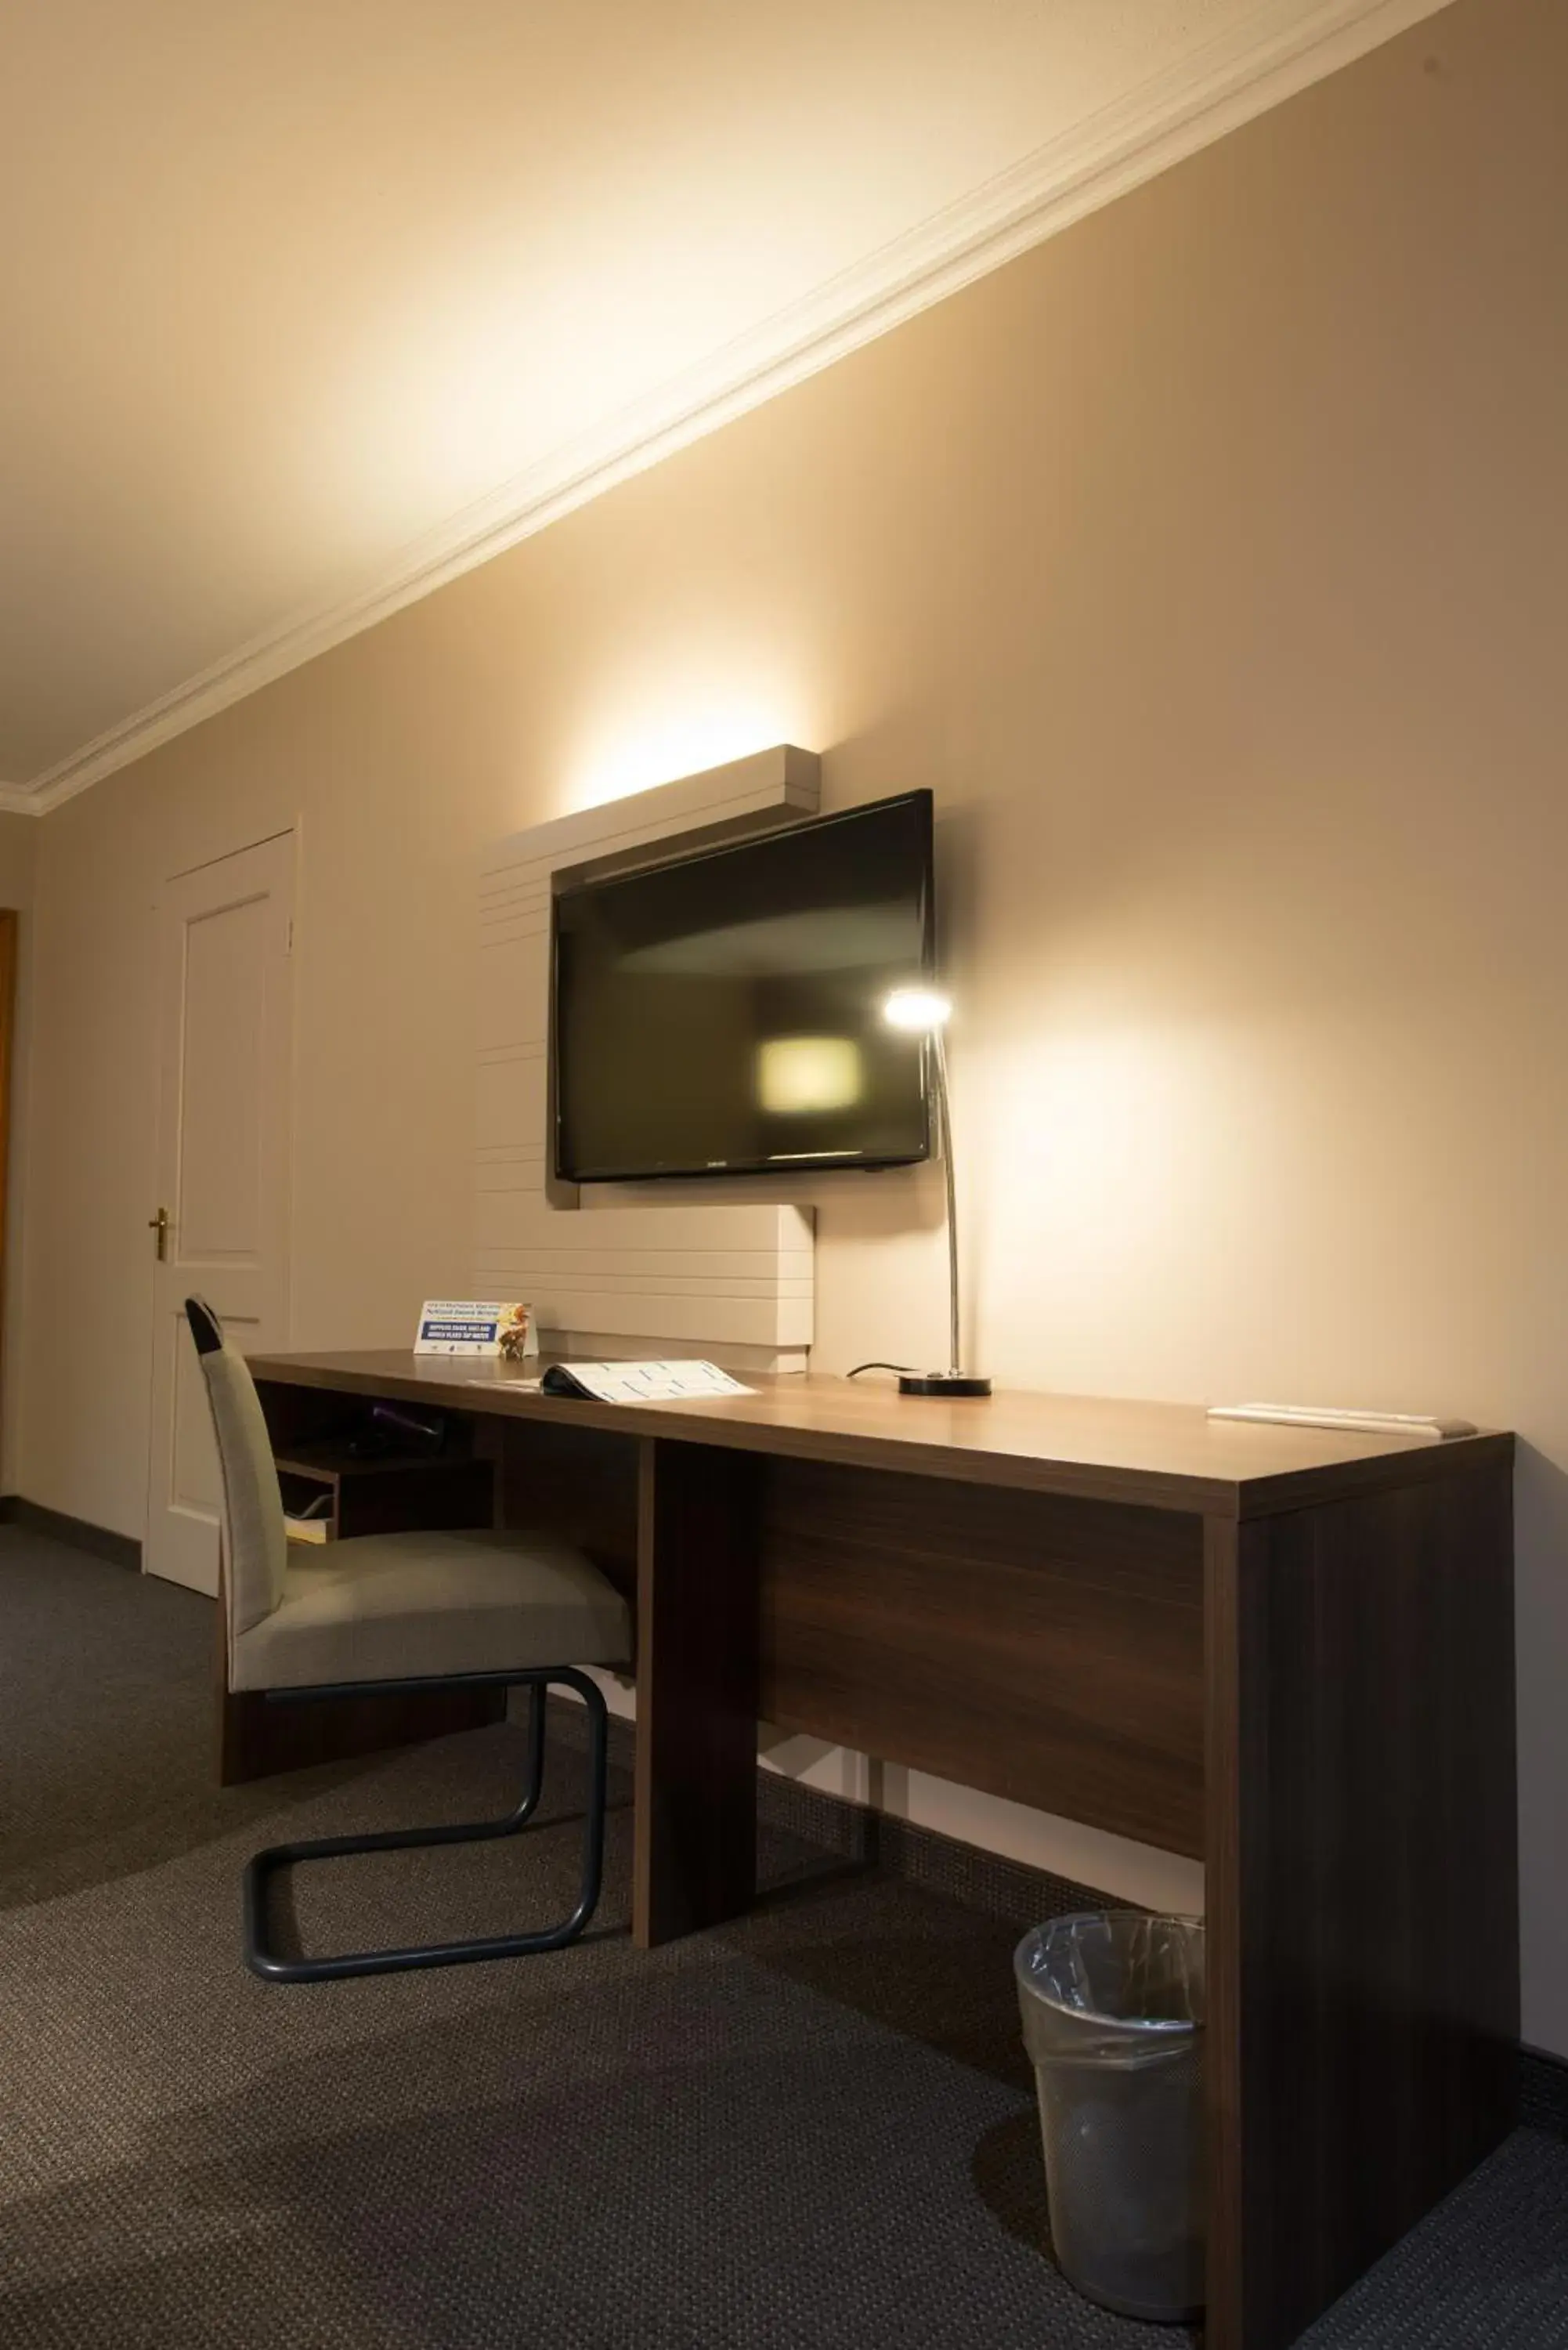 Bedroom, TV/Entertainment Center in Birchwood Hotel and OR Tambo Conference Centre